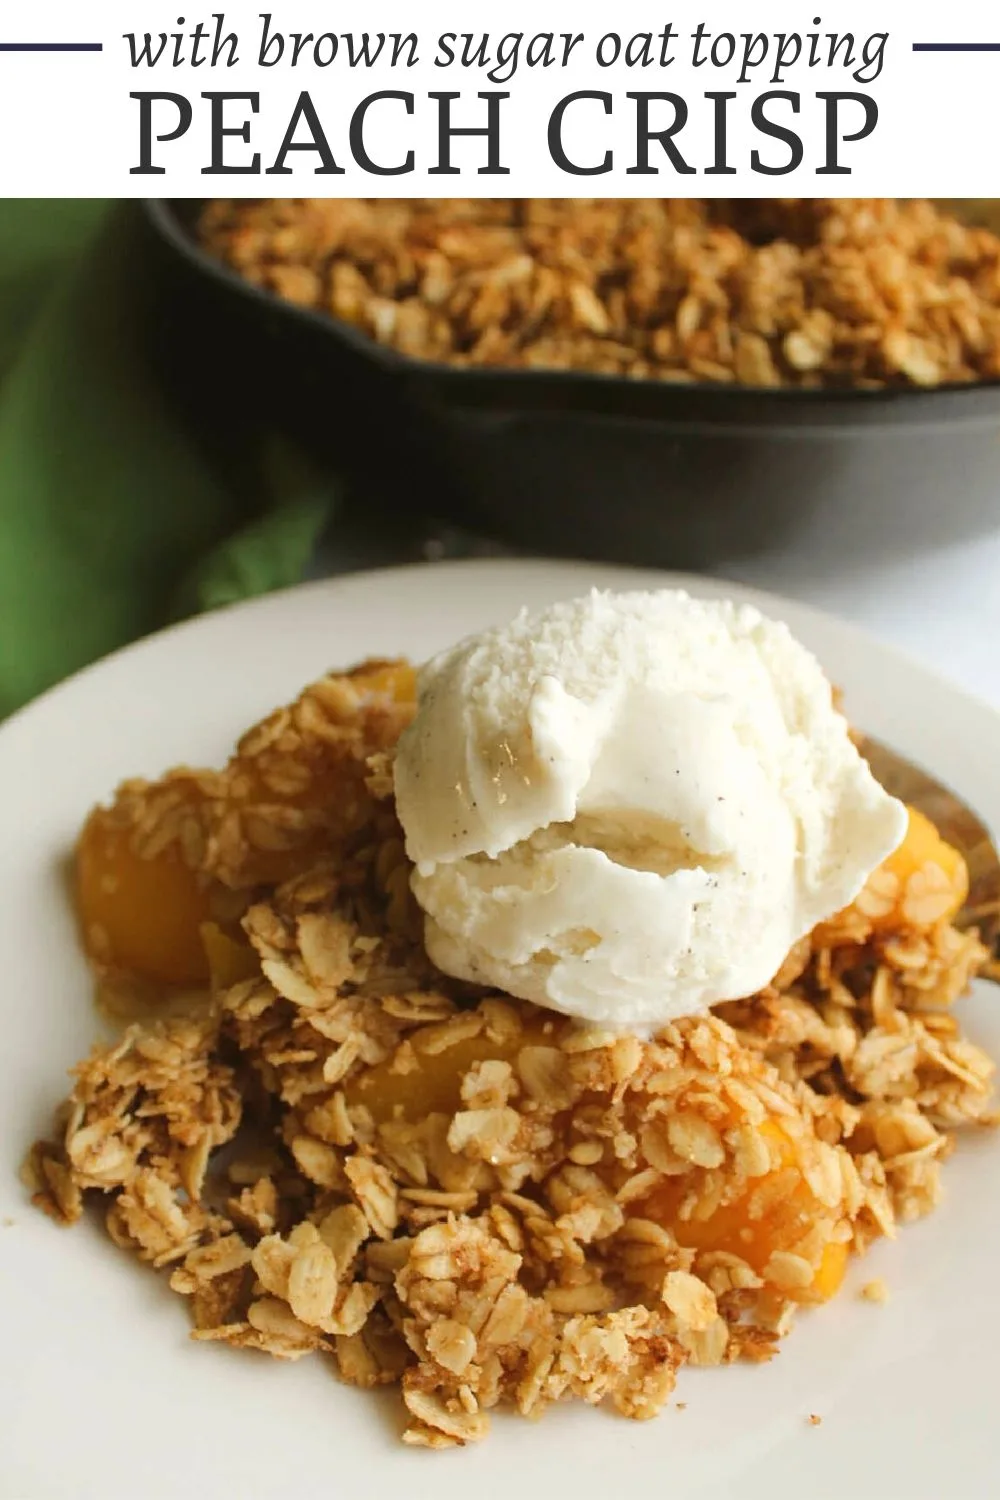 This peach crisp features peaches with a little bit of maple syrup and a brown sugar oat topping. It is great with fresh, frozen or canned peaches. Get a scoop of ice cream ready!